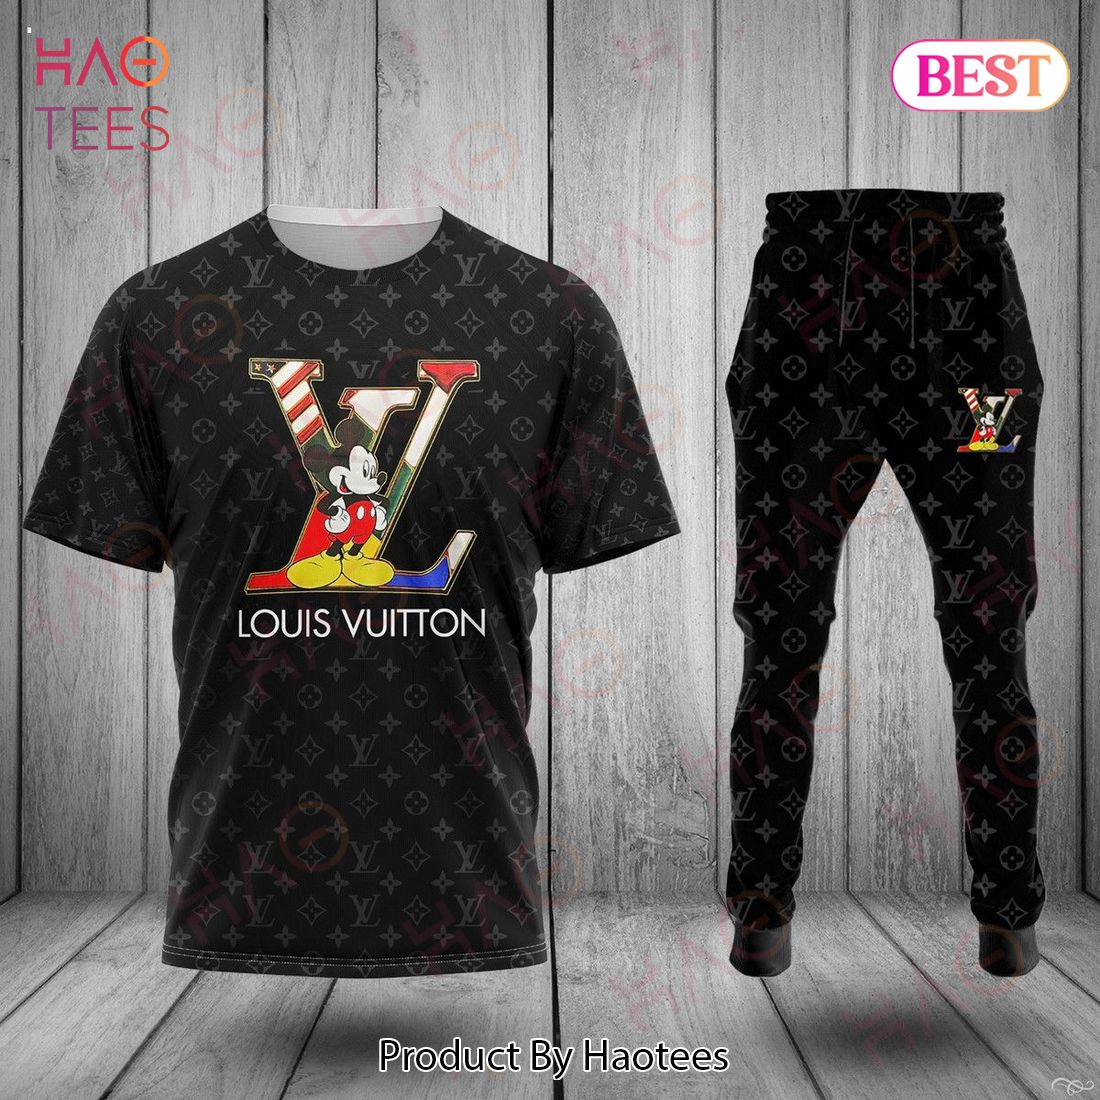 Louis Vuitton Mickey Mouse Luxury Brand T-Shirt And Pants Limited Edition